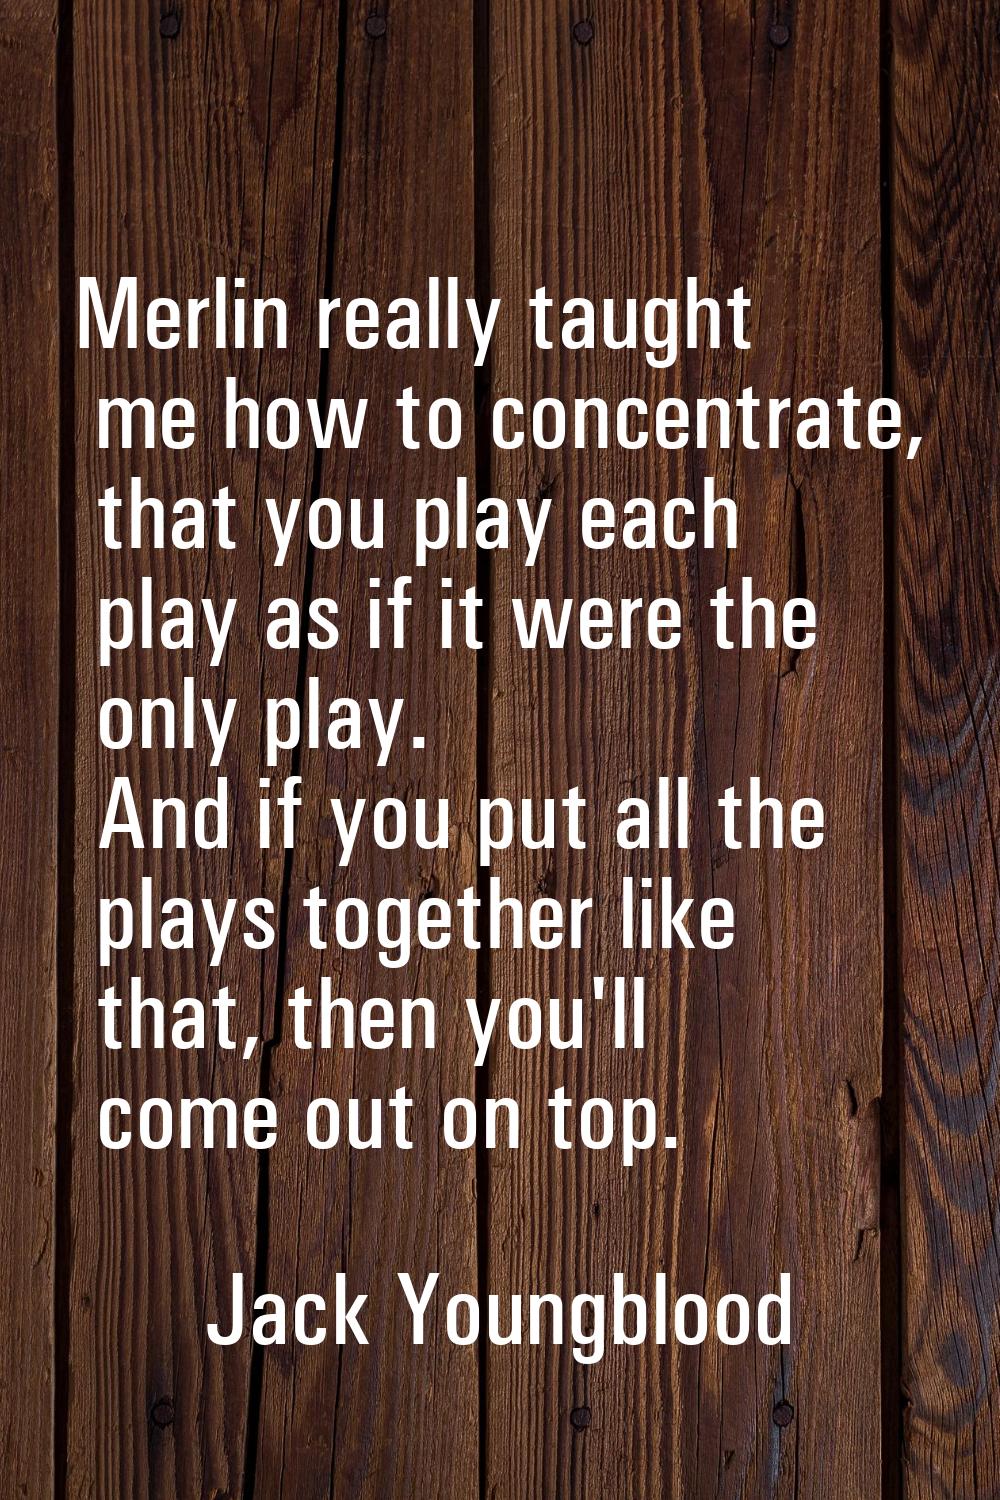 Merlin really taught me how to concentrate, that you play each play as if it were the only play. An